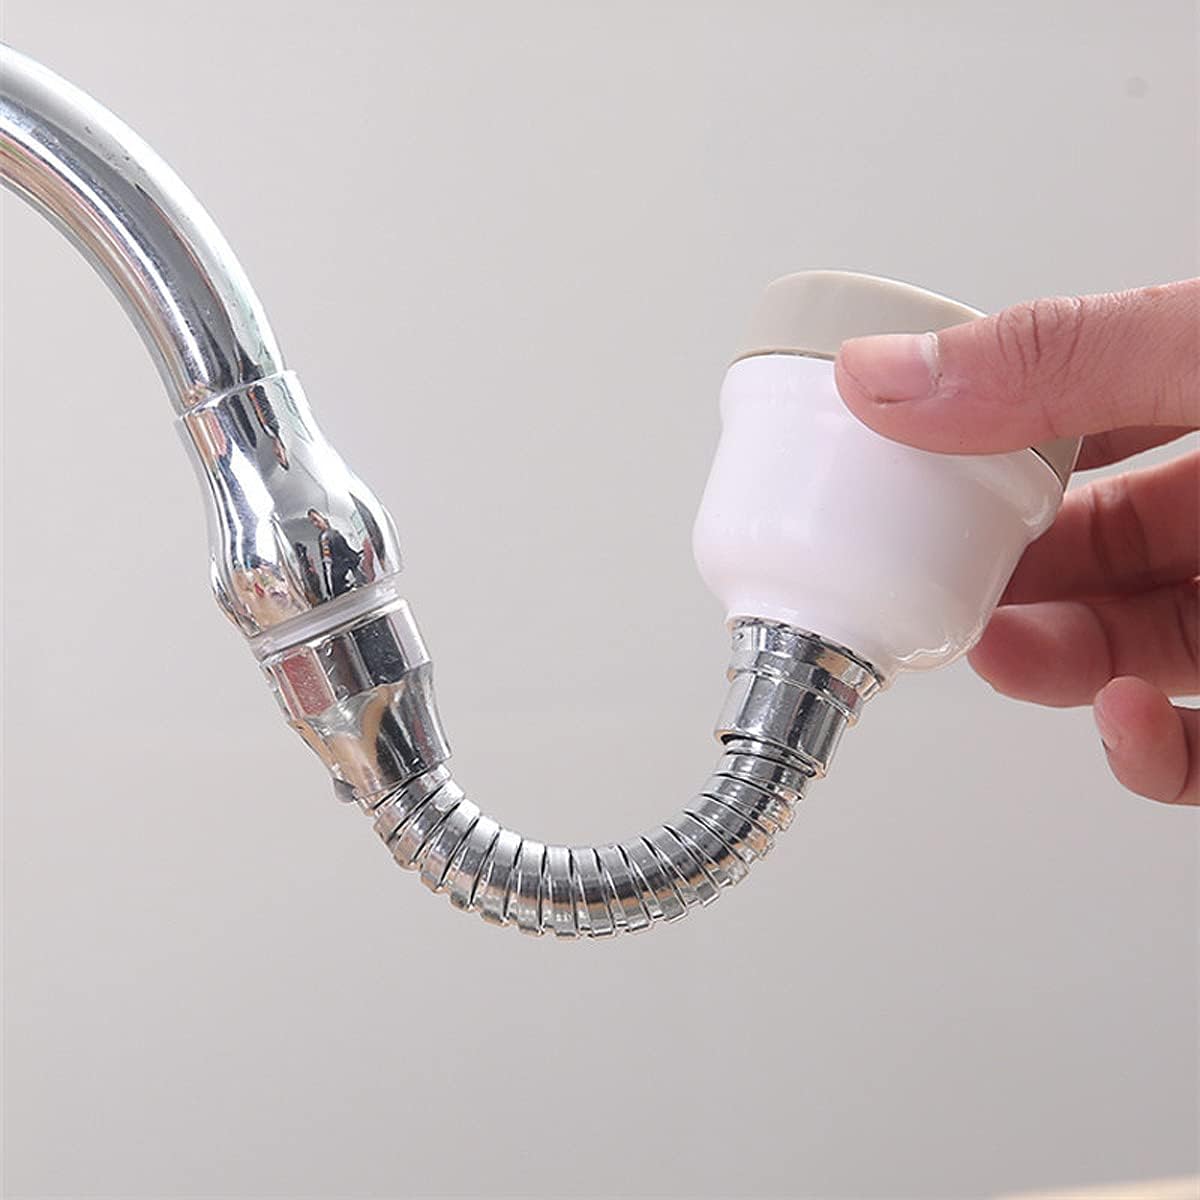 Water filter faucet 3 positions adjustable 360 degree swivel faucet